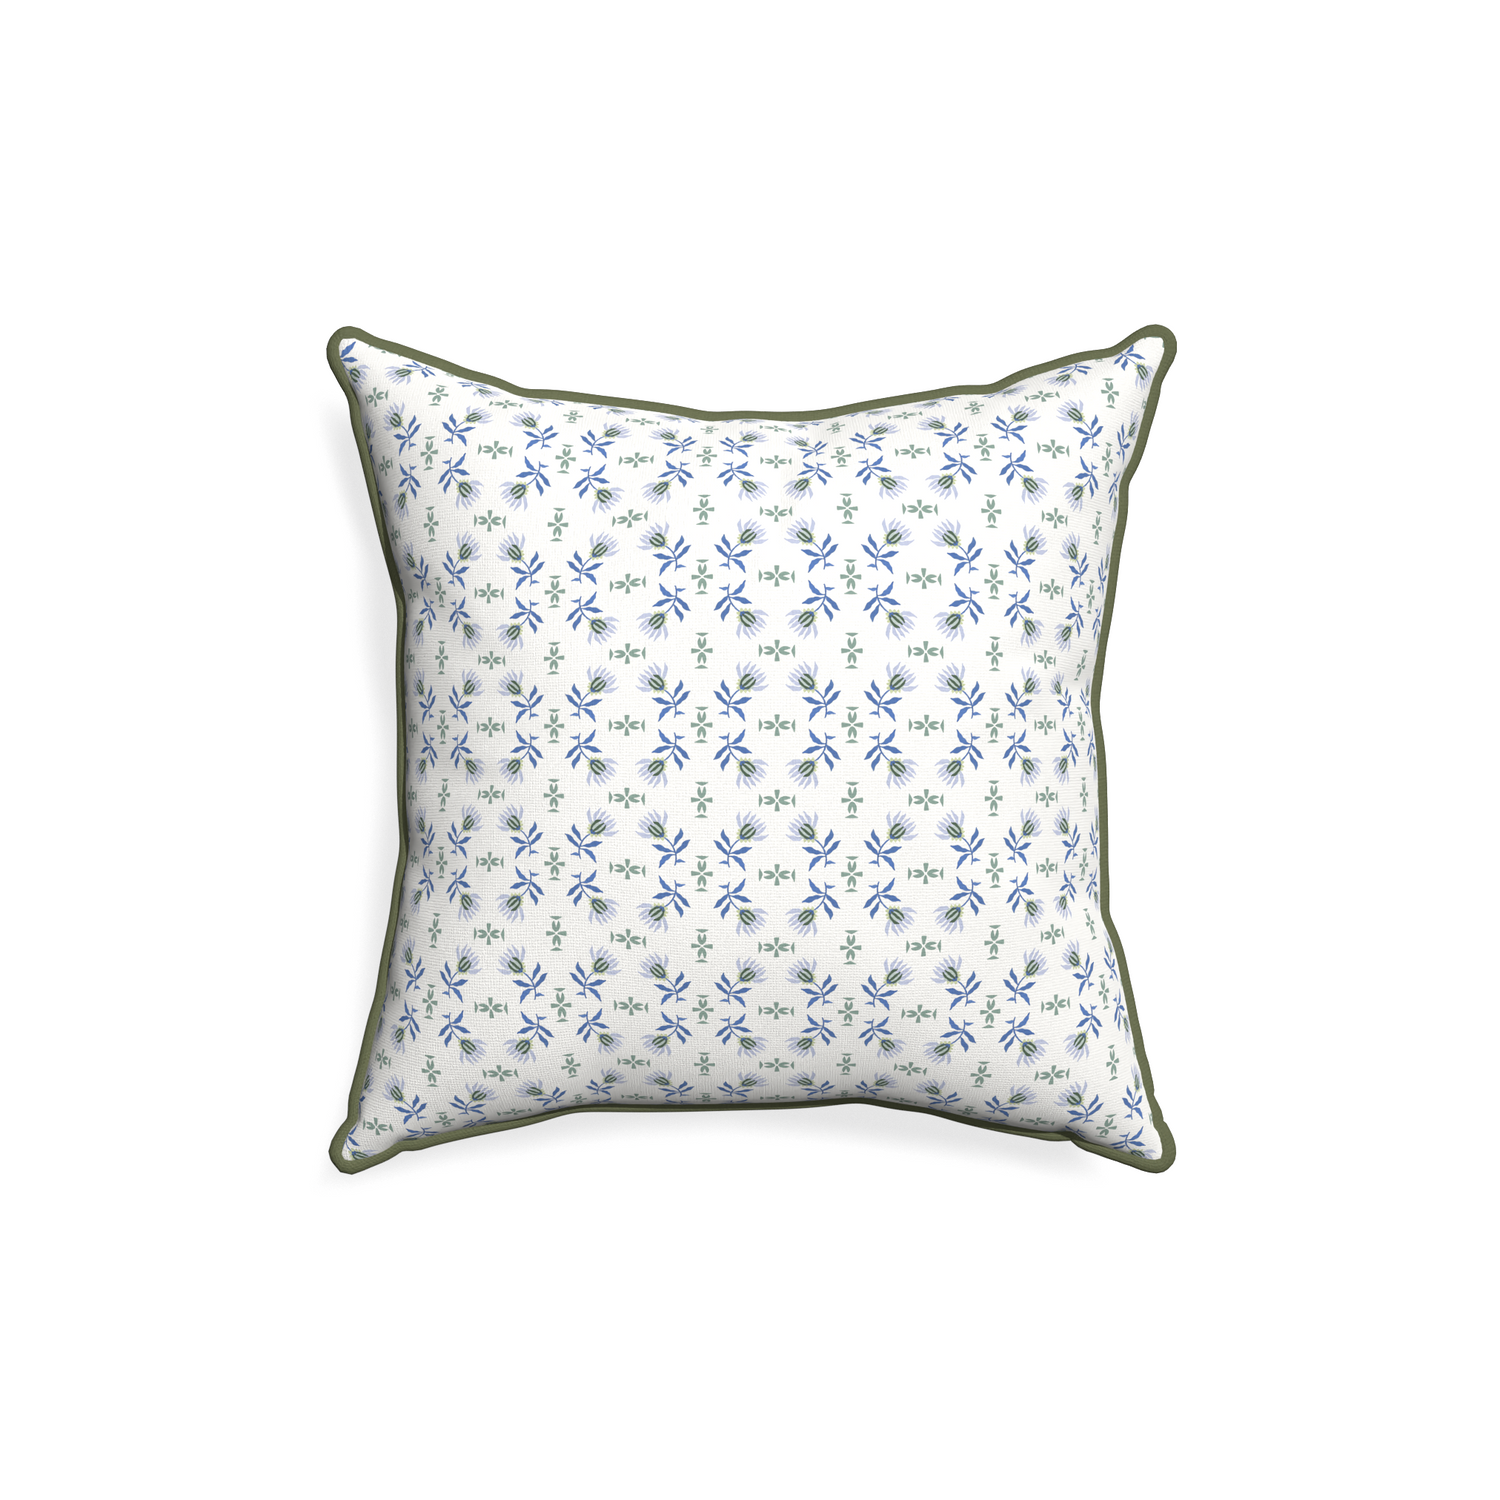 18-square lee custom pillow with f piping on white background